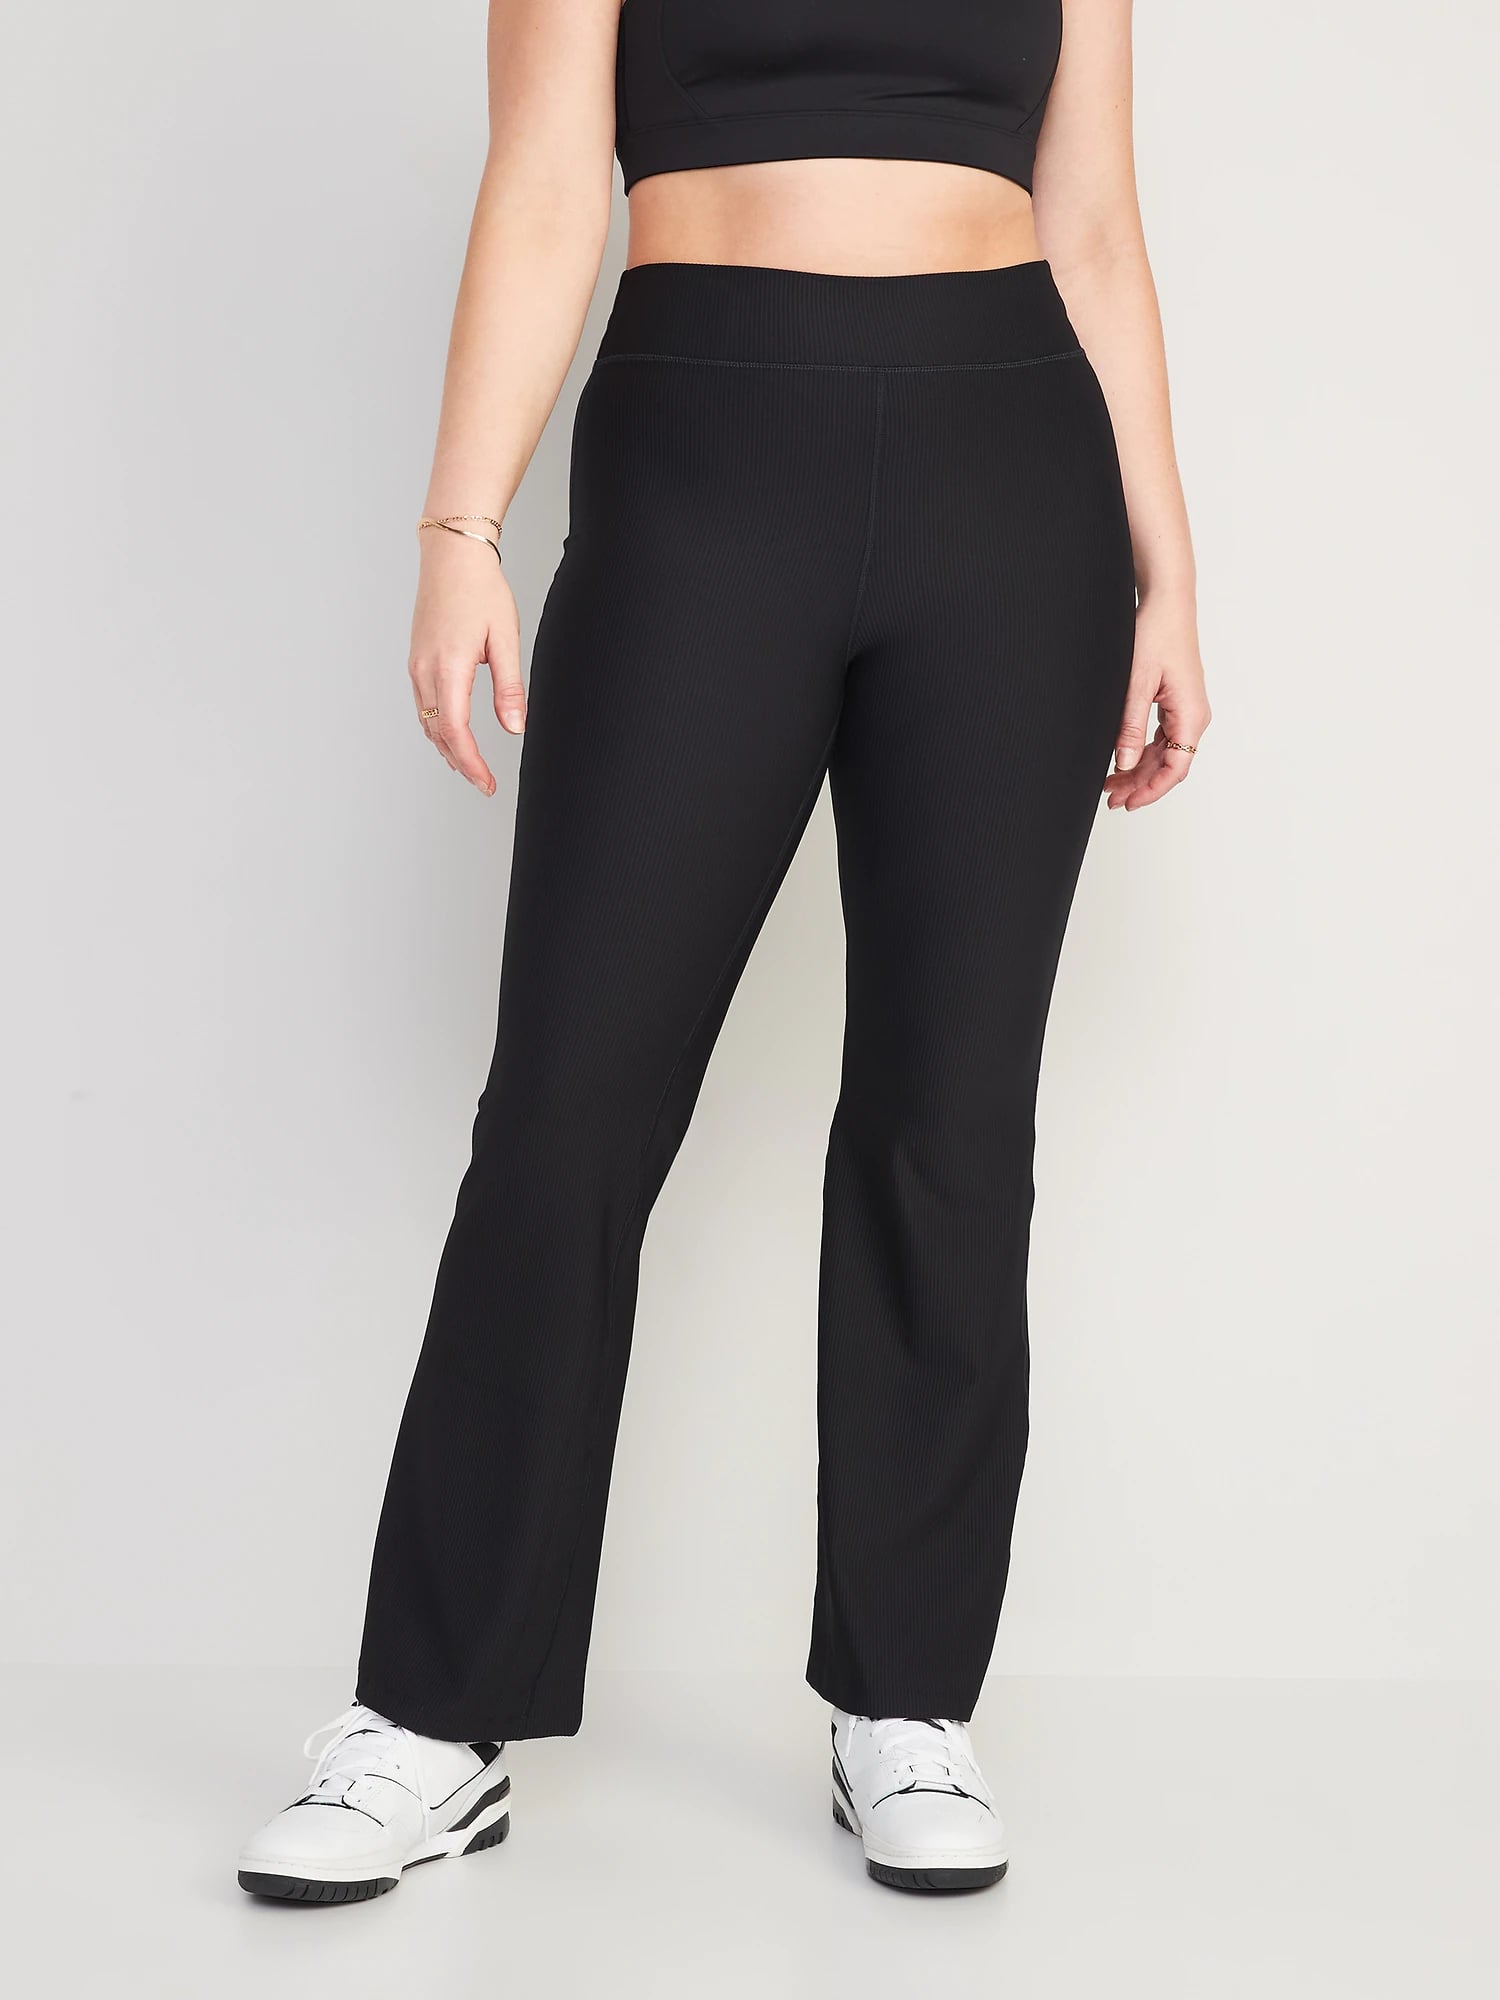 The Best Old Navy Workout Leggings, 2023